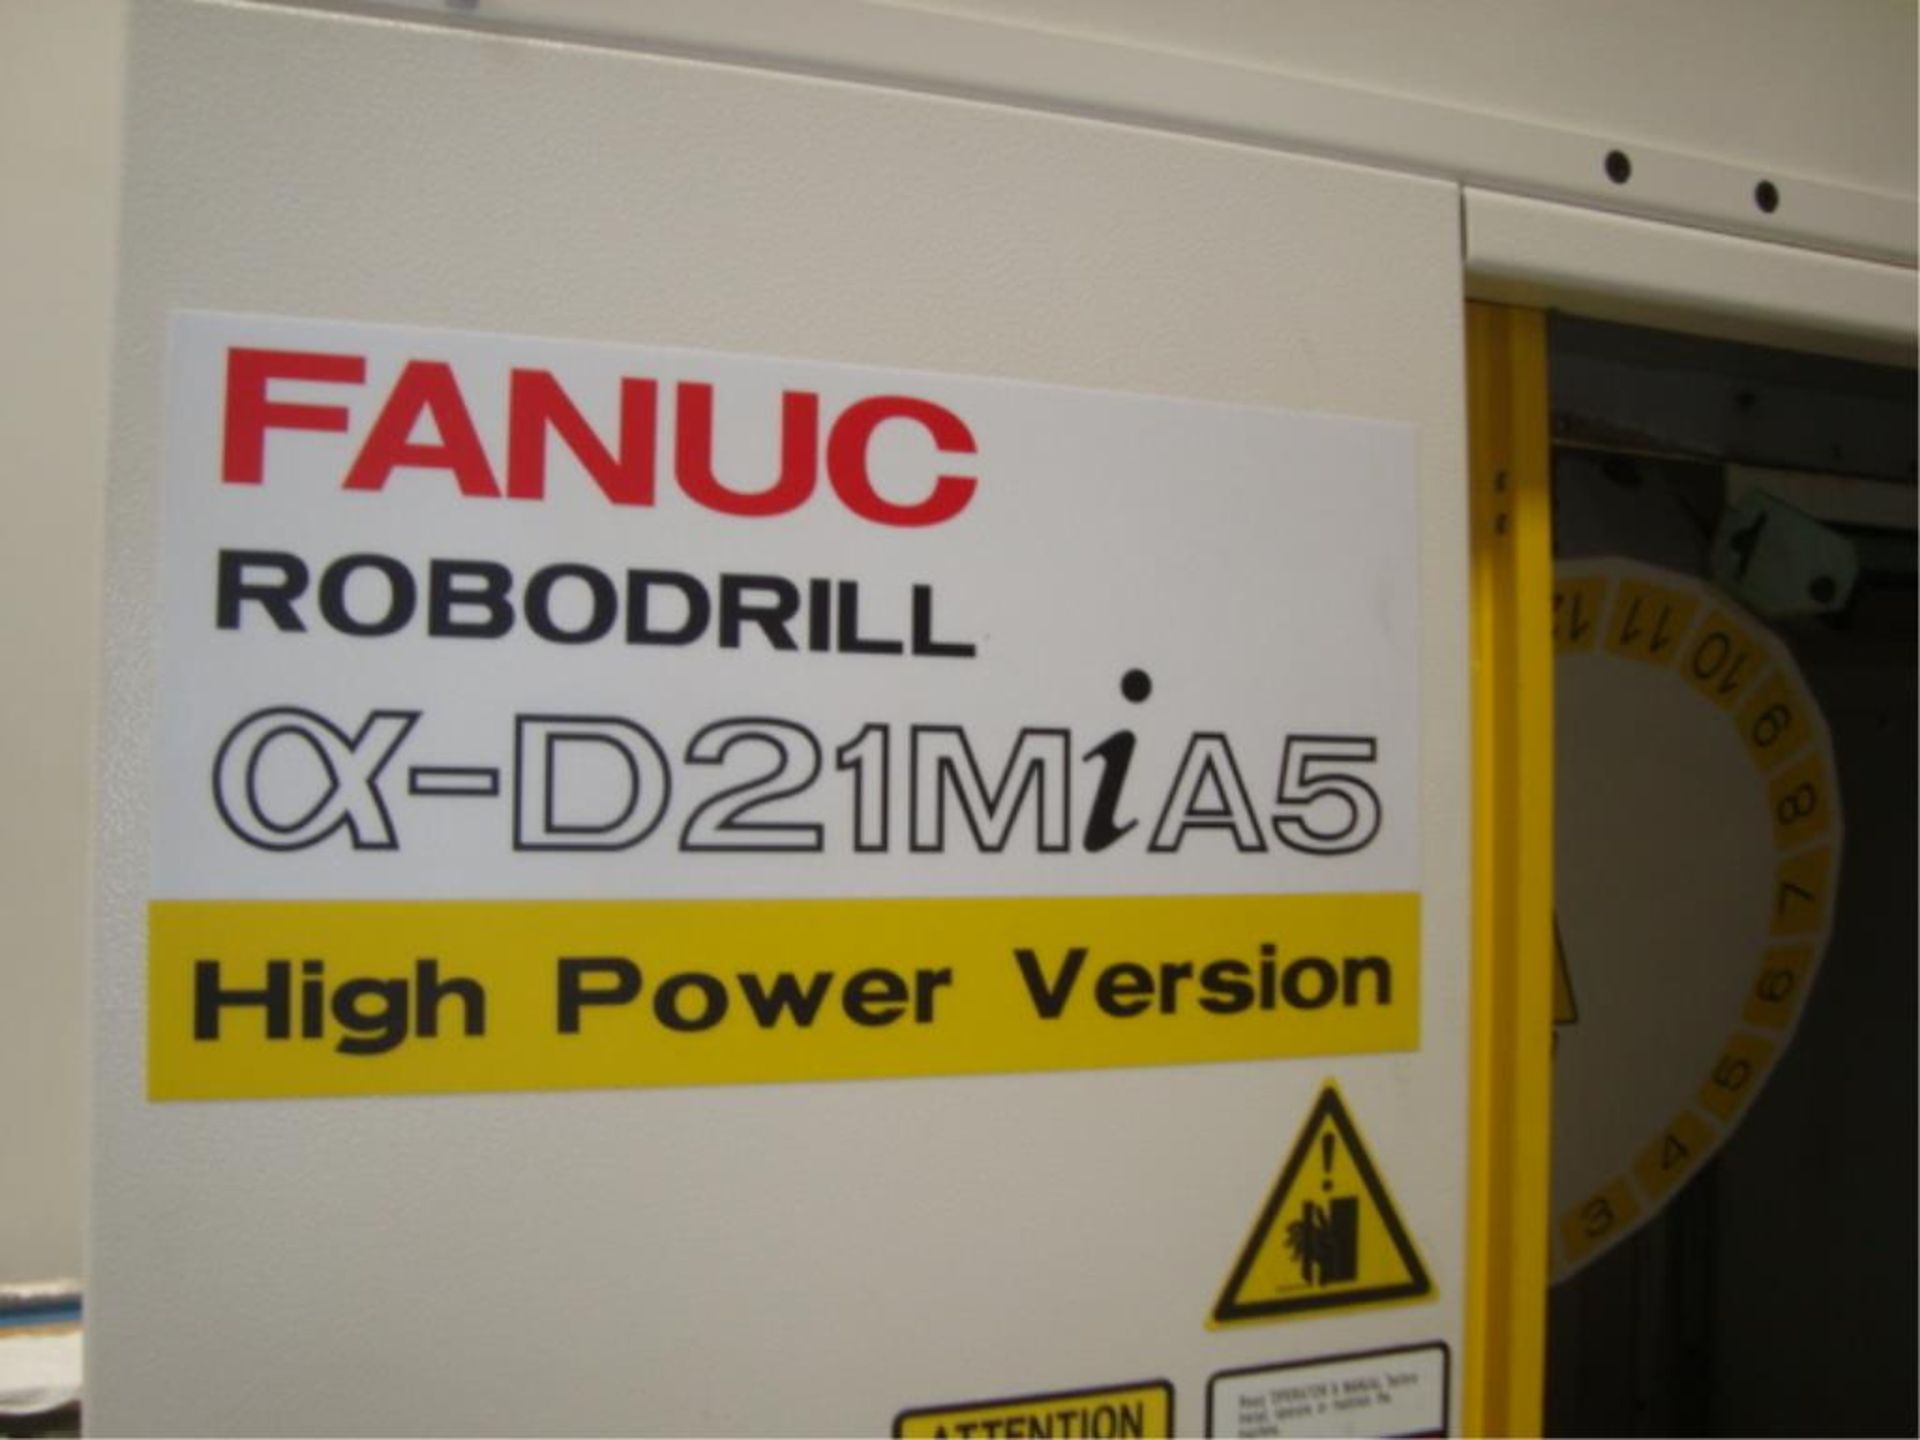 Fanuc Robodrill Alpha-D21MiA5 with Fanuc M-10iA 6-Axis Robot - Image 38 of 60